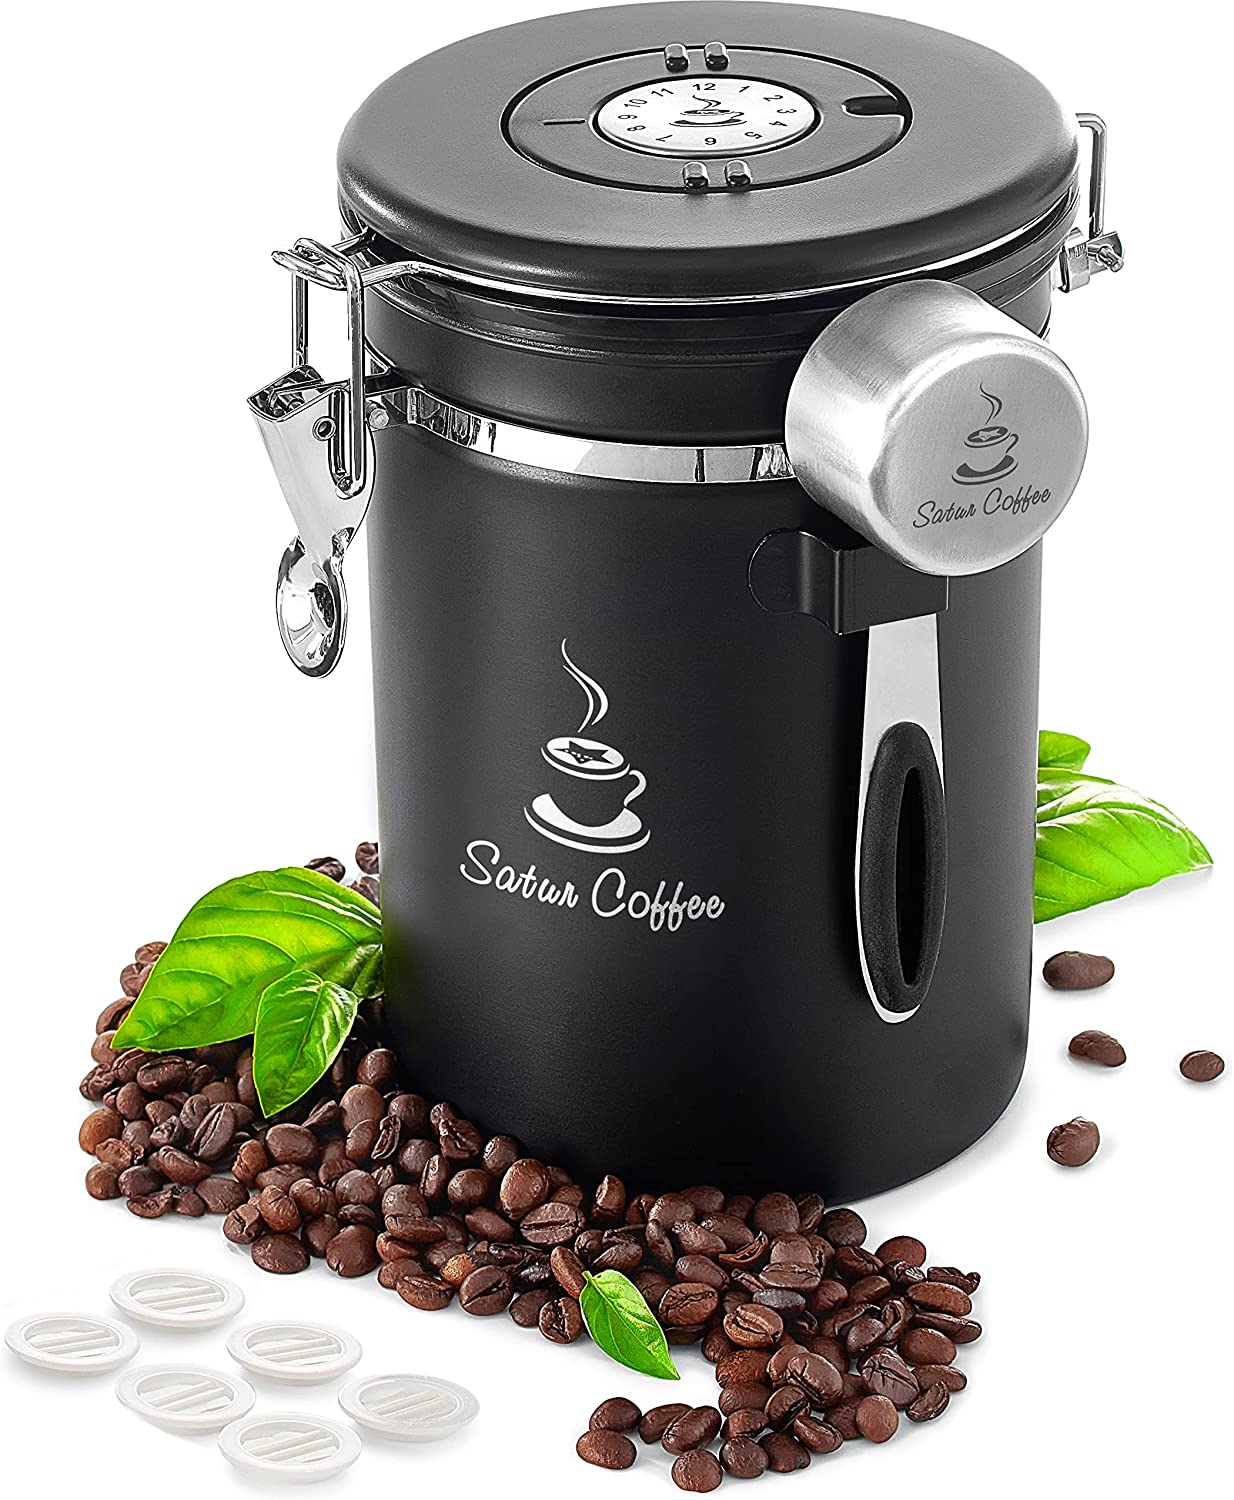 Star Coffee Stainless All-In-One Coffee Canister